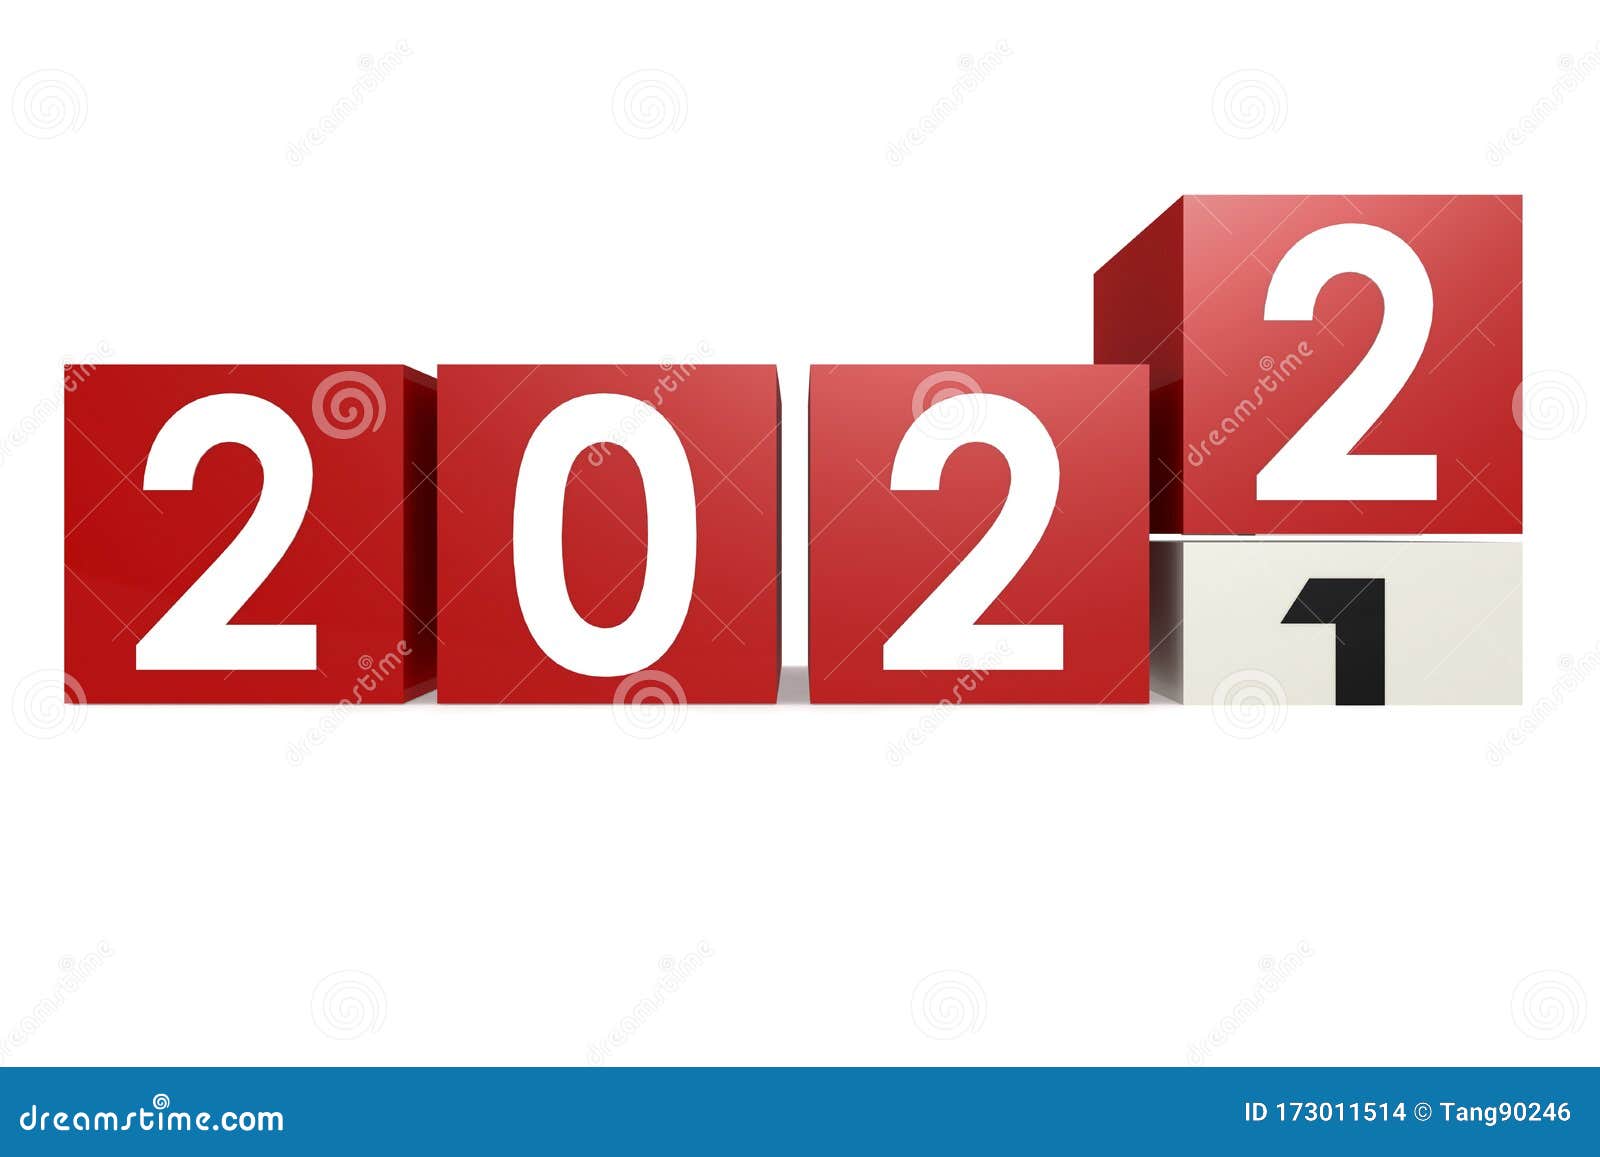 Year 2022 is coming stock illustration. Illustration of